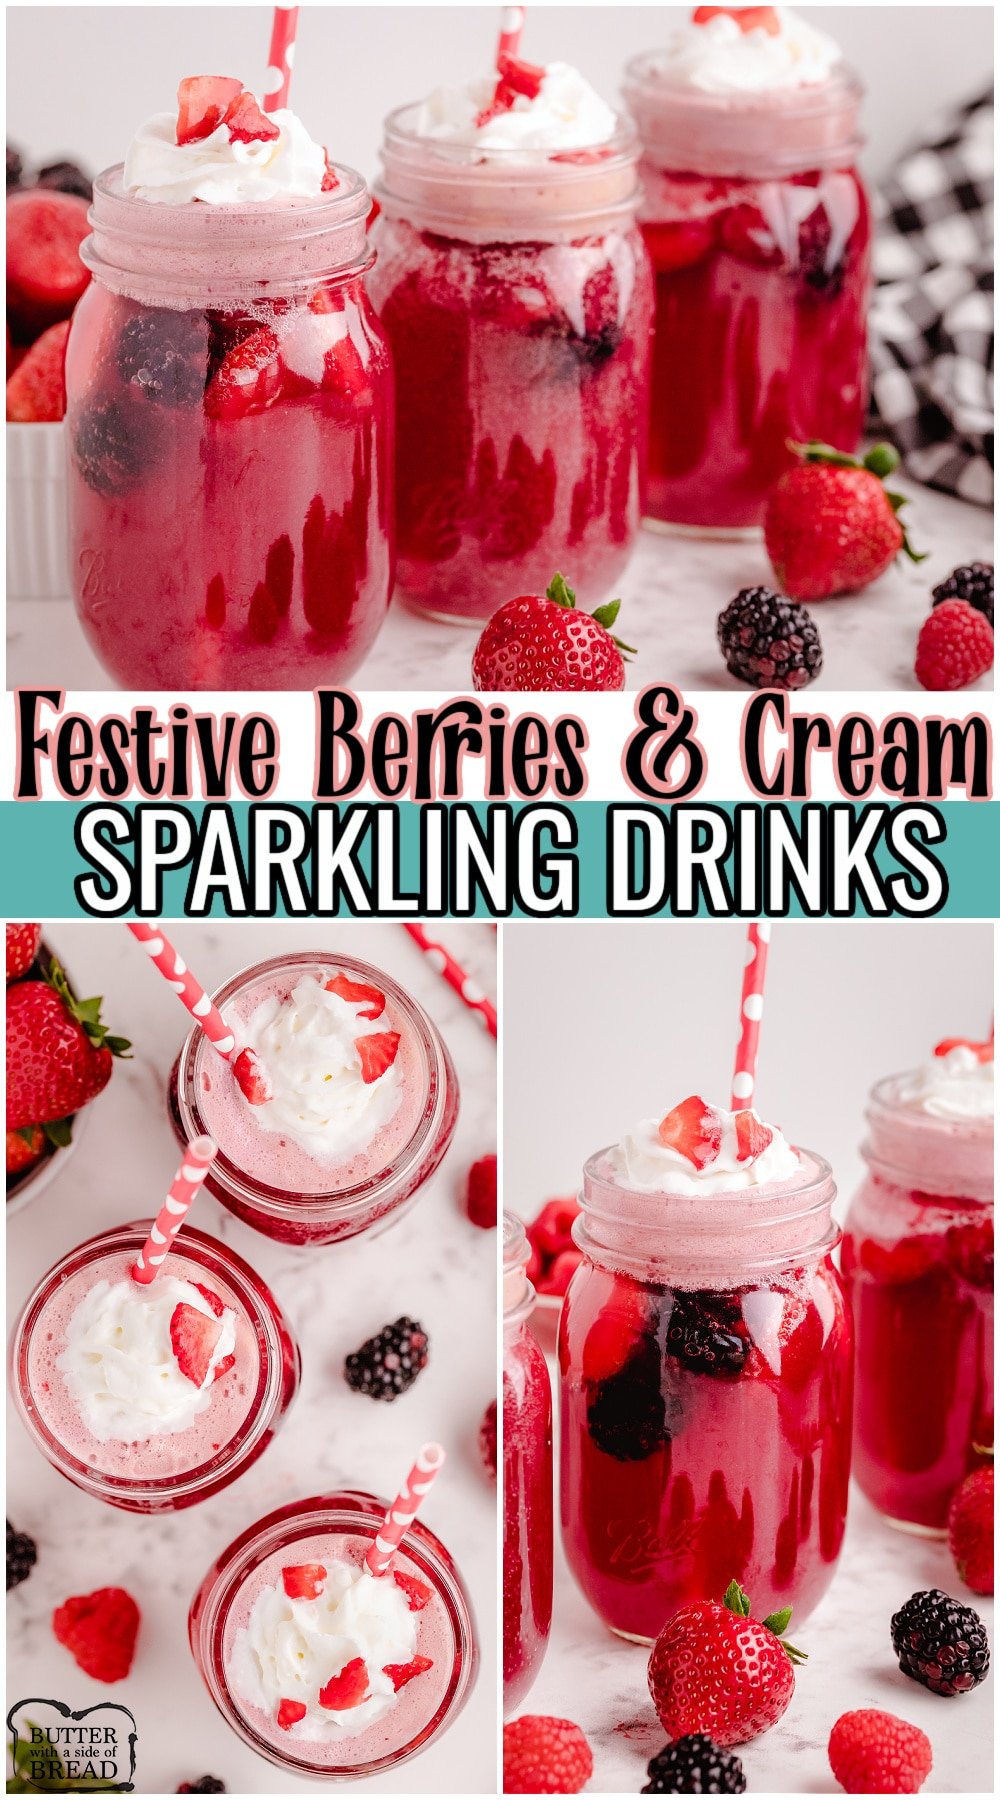 Berries & Cream Sparklers made with simple ingredients and perfect for parties! Delicious fizzy berry drinks made with soda, juice, fresh berries and ice cream.